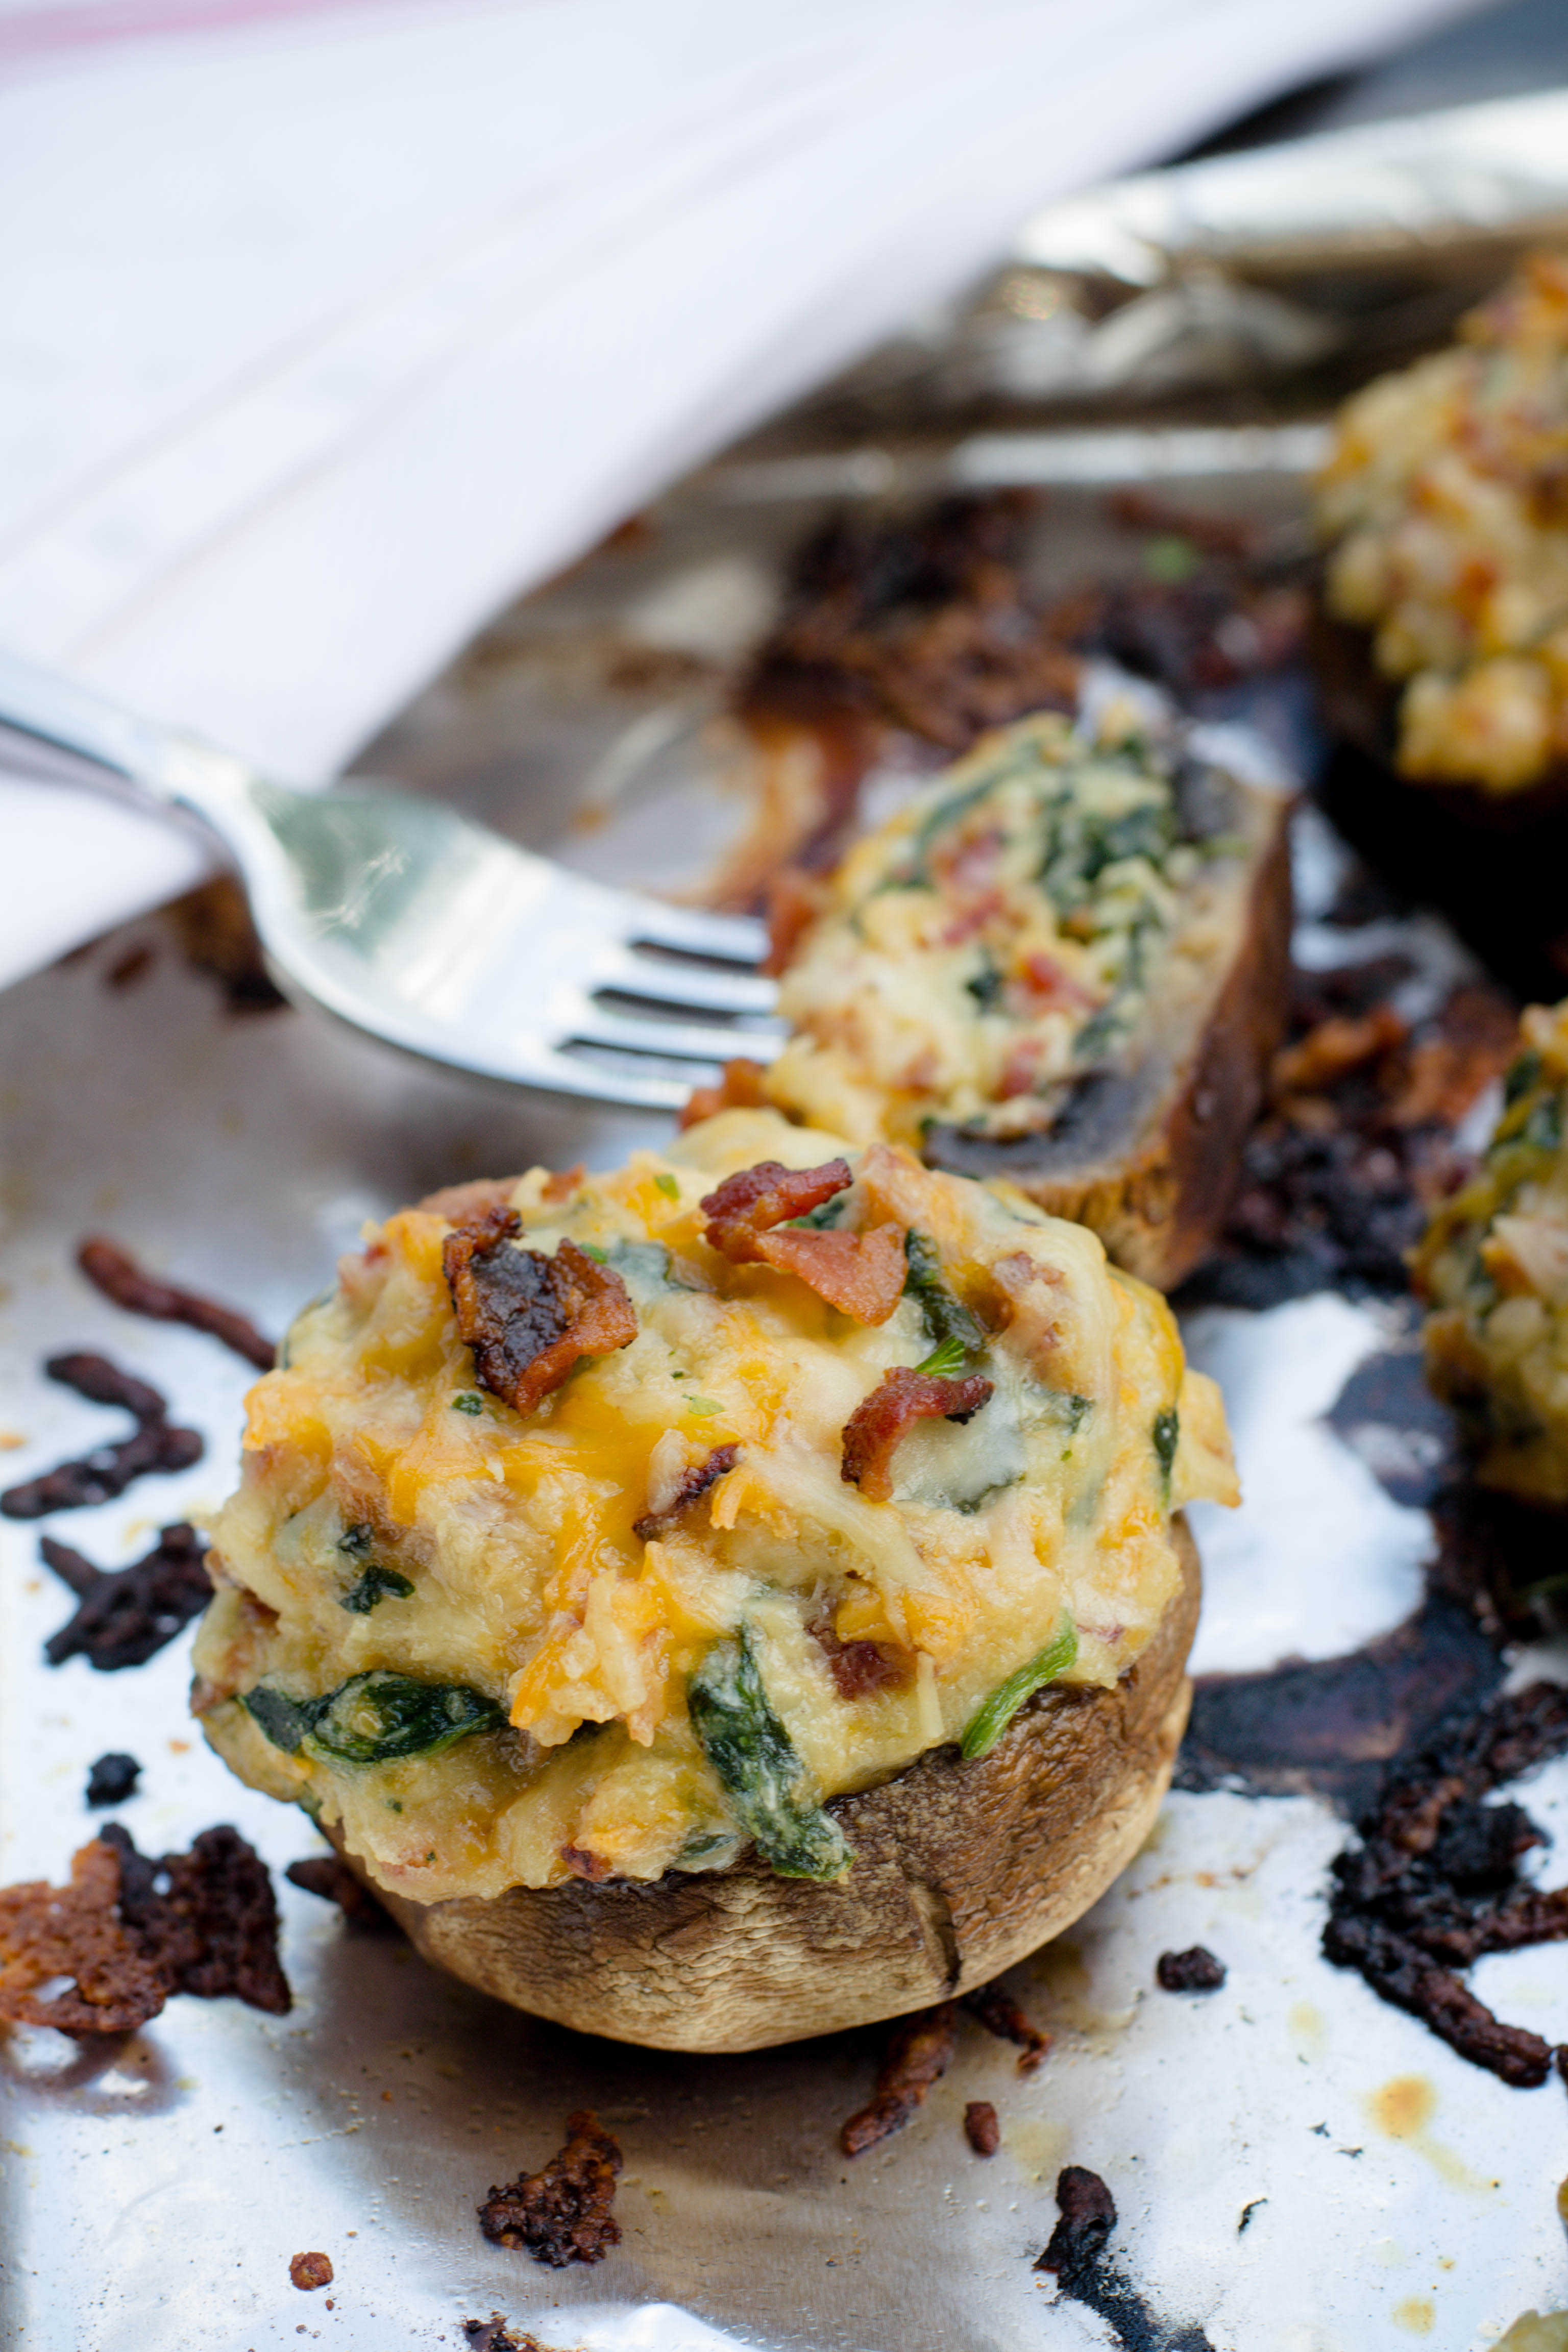 Grilled Stuffed Mushrooms - What the Forks for Dinner?